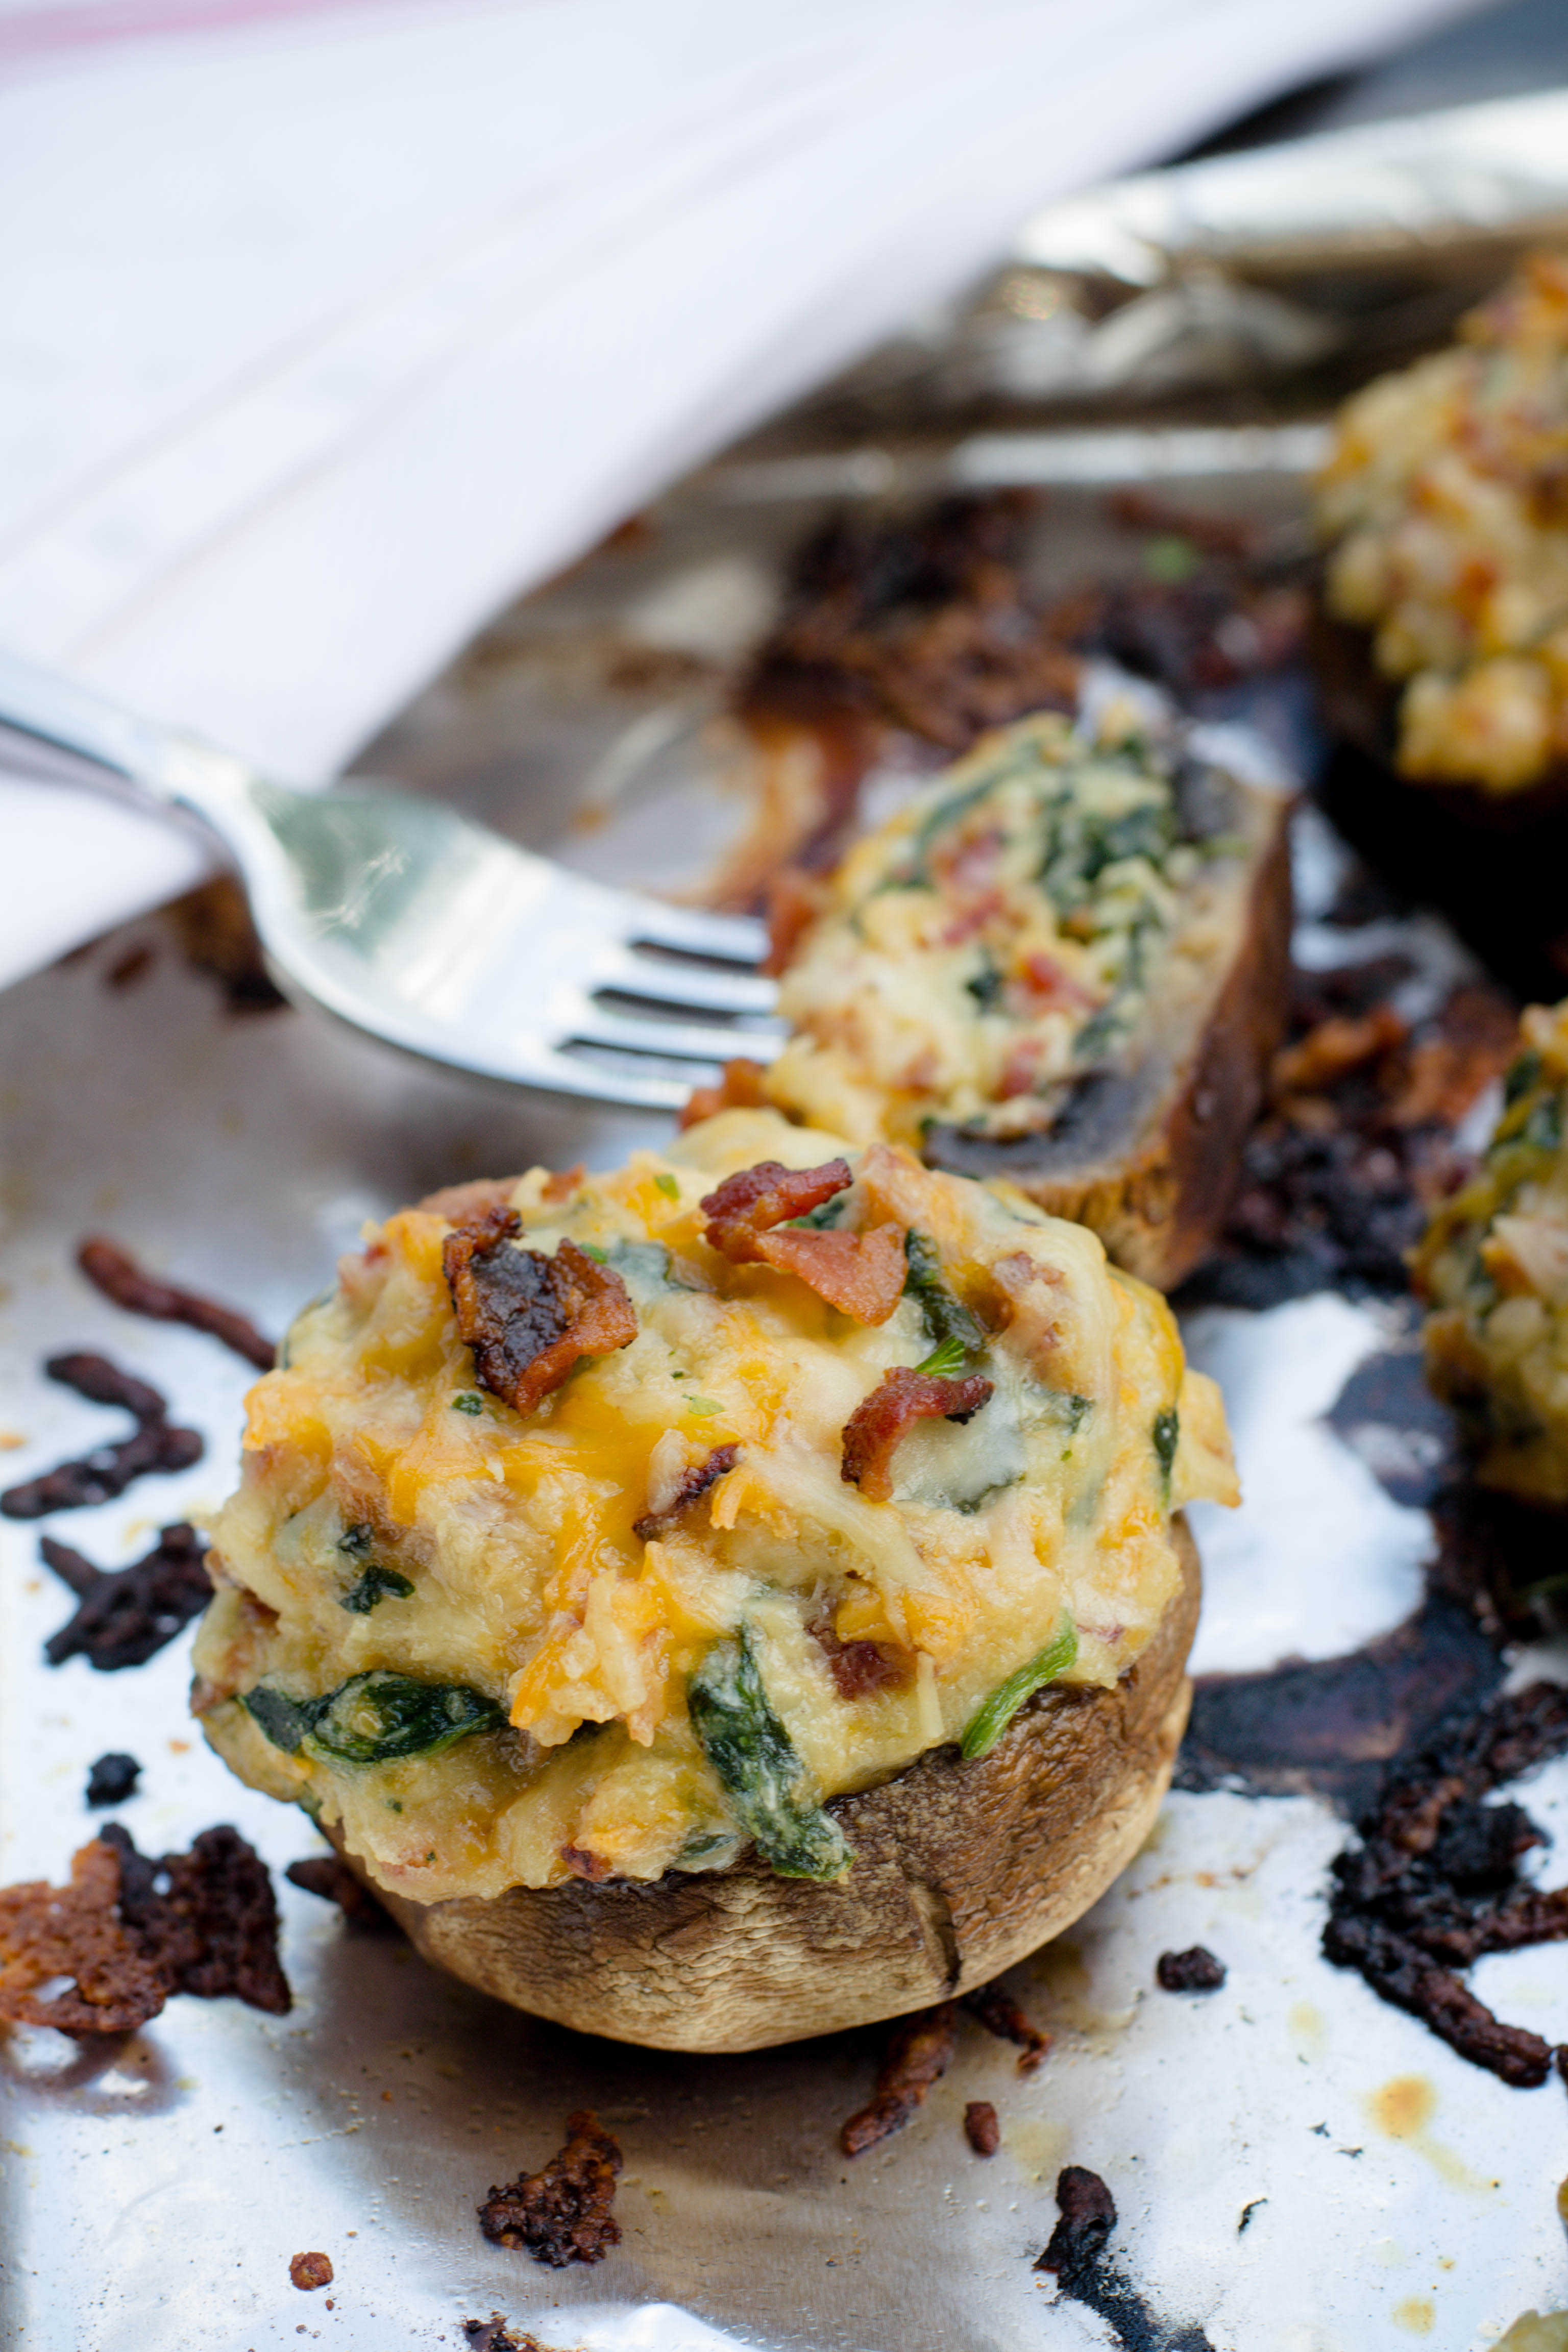 Grilled Stuffed Mushrooms - What the Forks for Dinner?